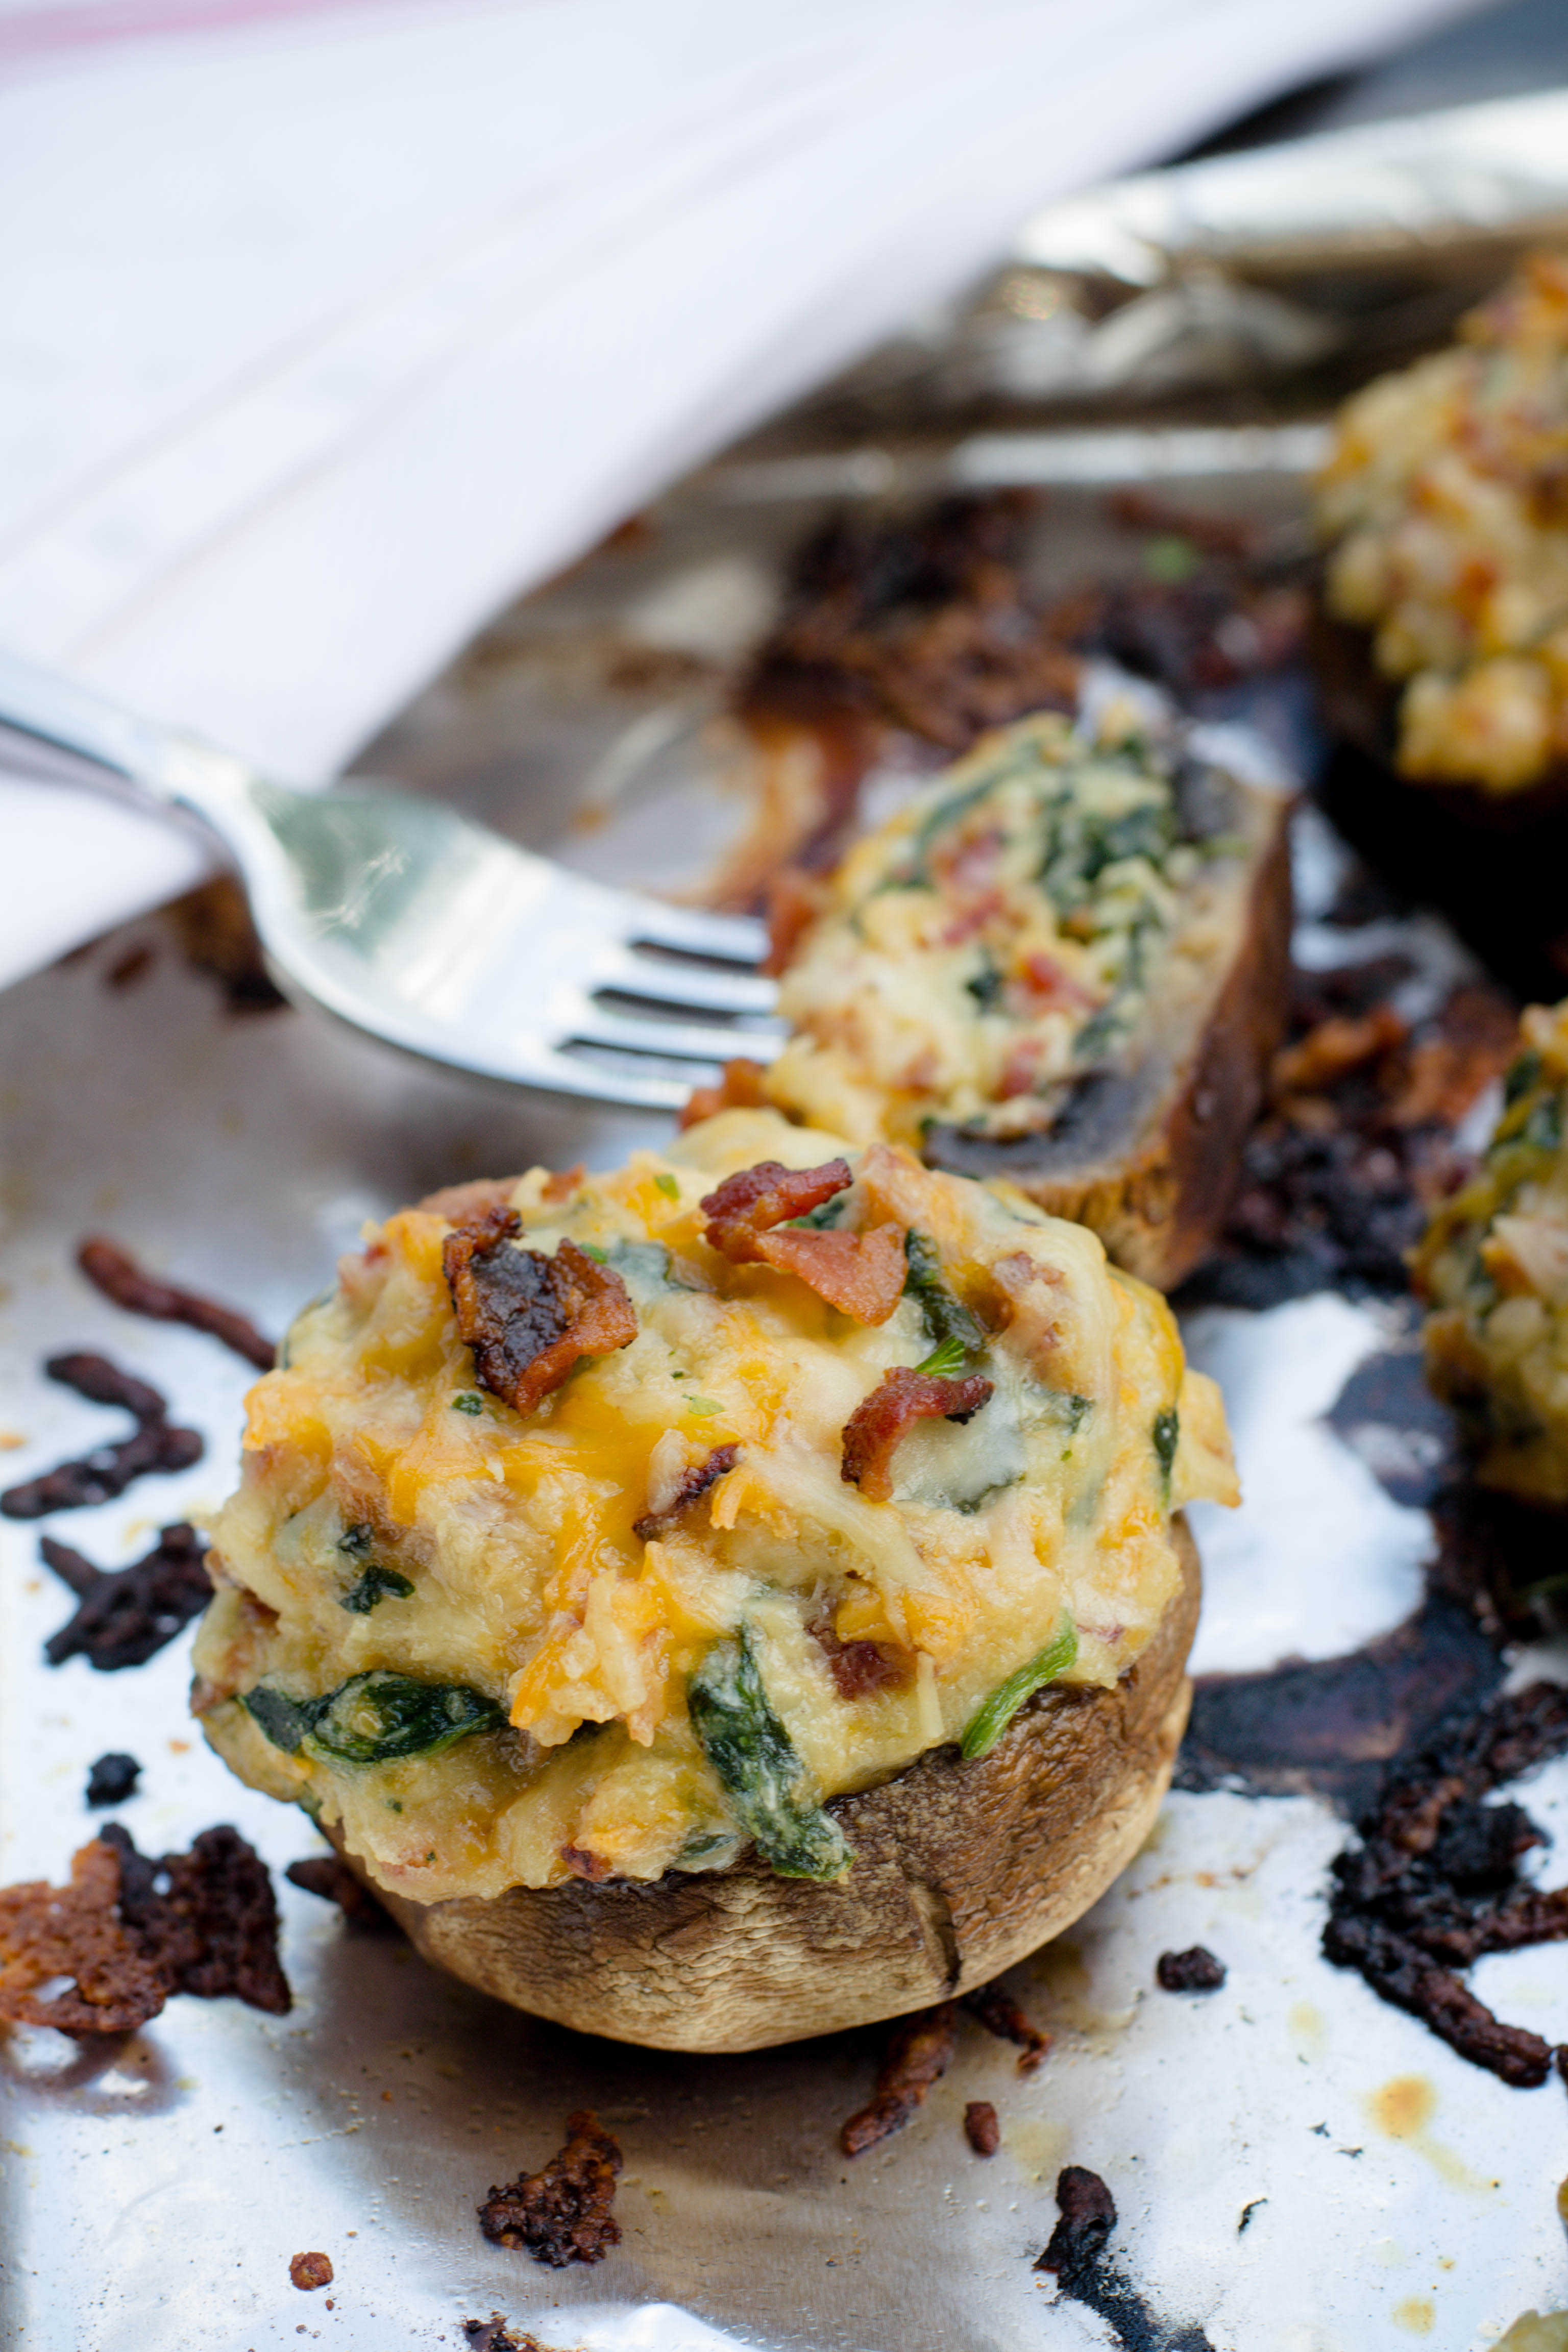 Grilled Stuffed Mushrooms - What the Forks for Dinner?